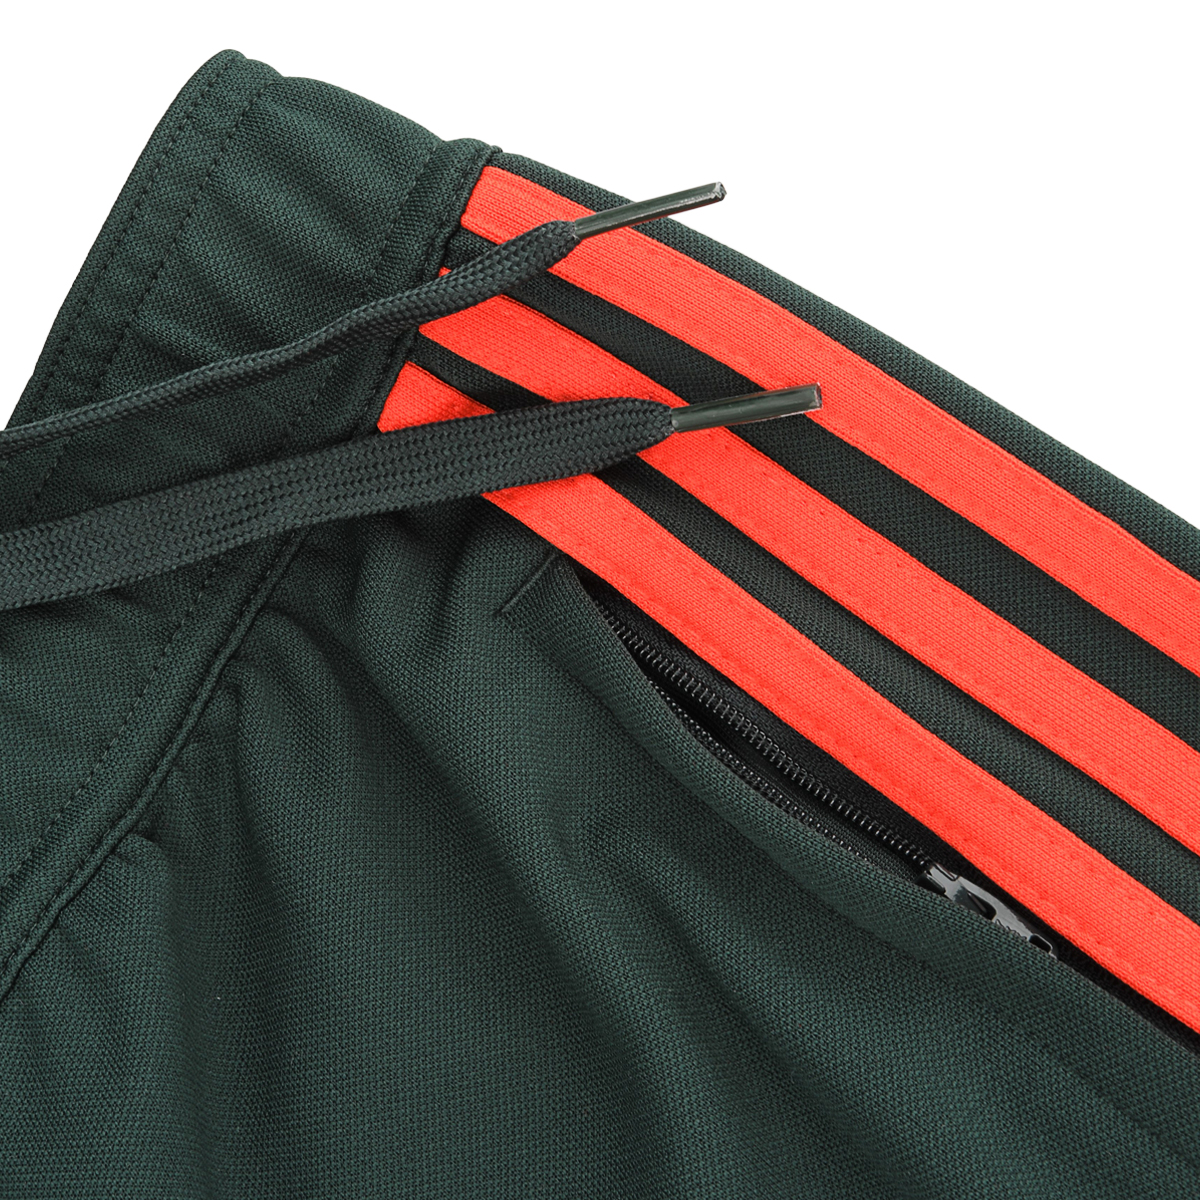 Conjunto adidas River Plate,  image number null